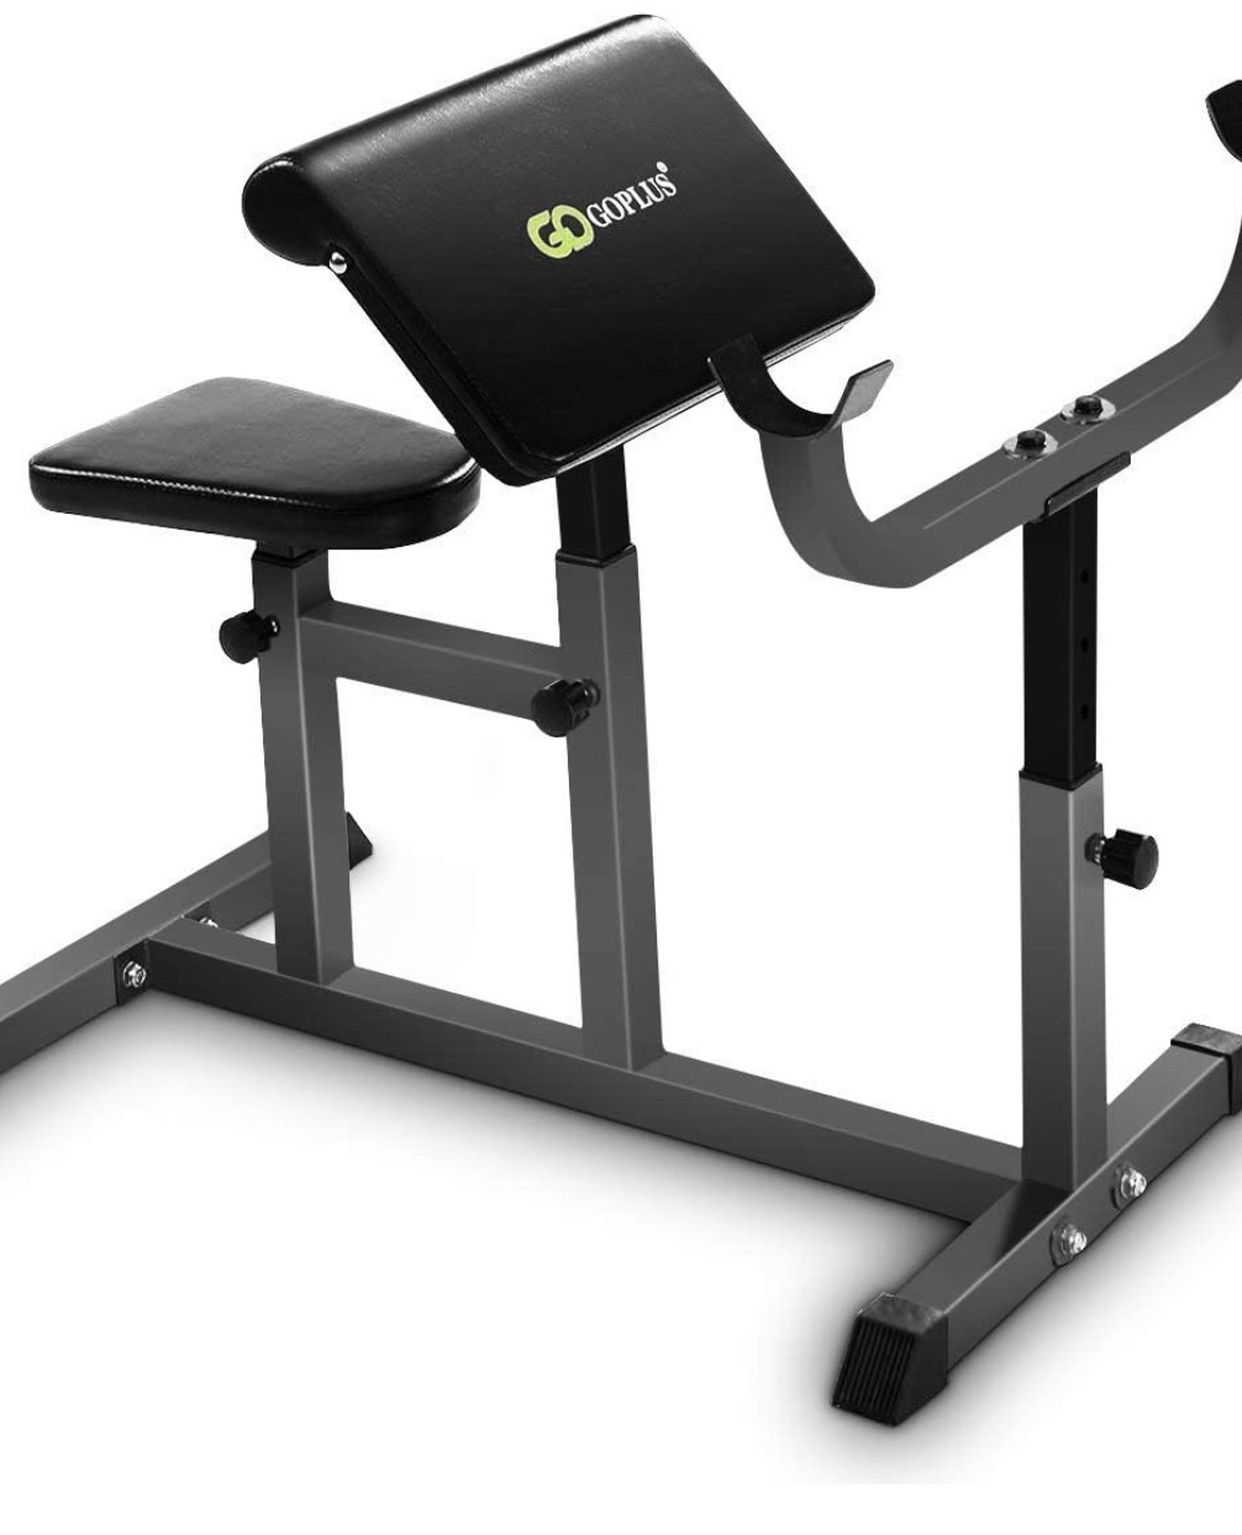 Goplus Preacher Curl Weight Bench Seated Arm Isolated Barbell Dumbbell Station